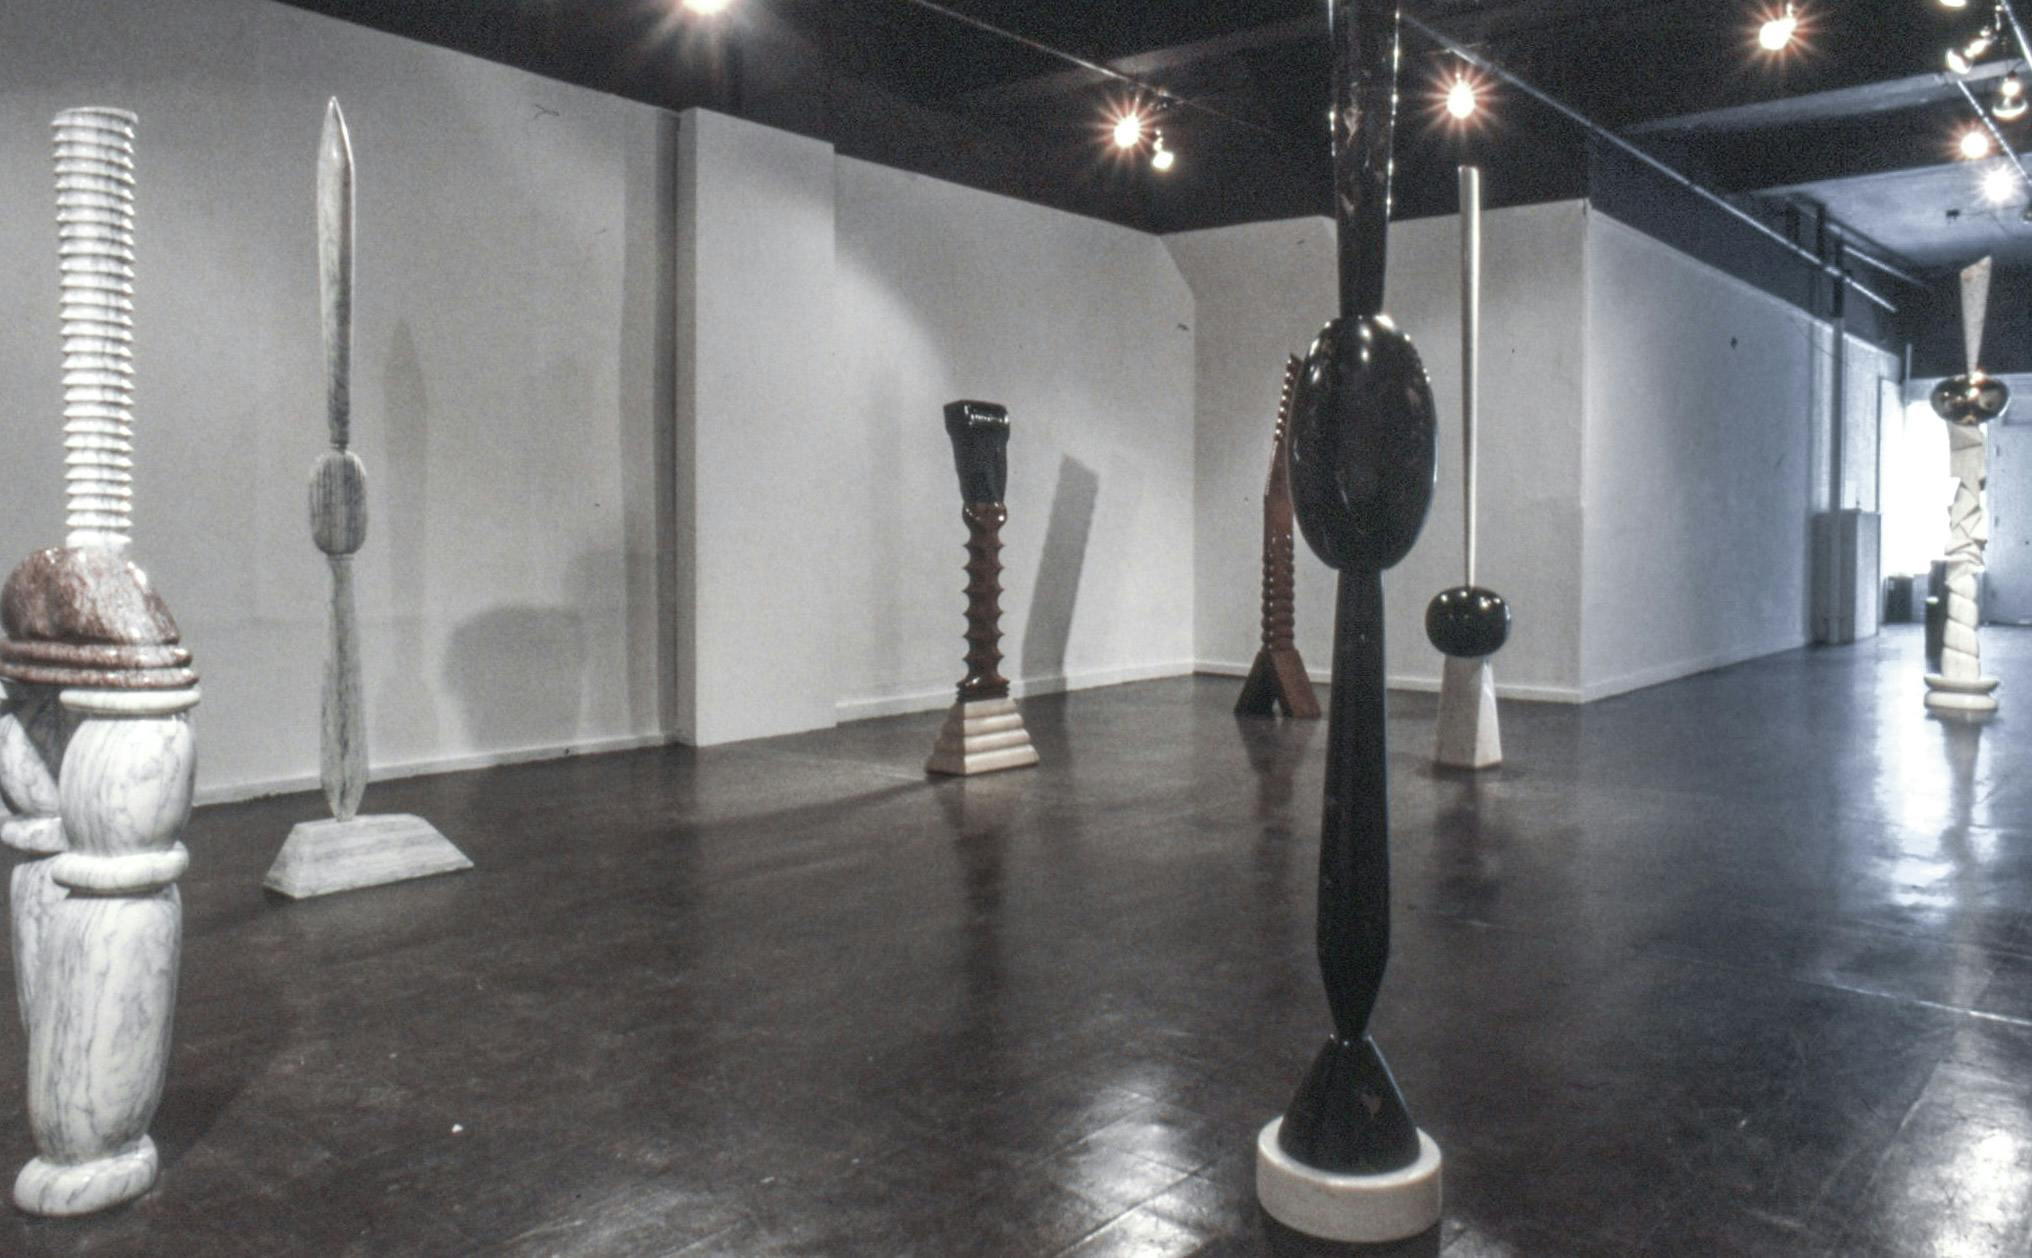 Seven tall sculptures visible in a gallery space. The sculptures are a mix of black, brown and white stone, carved into shapes like ovals, ridged poles, and wavy slabs arranged in different ways.